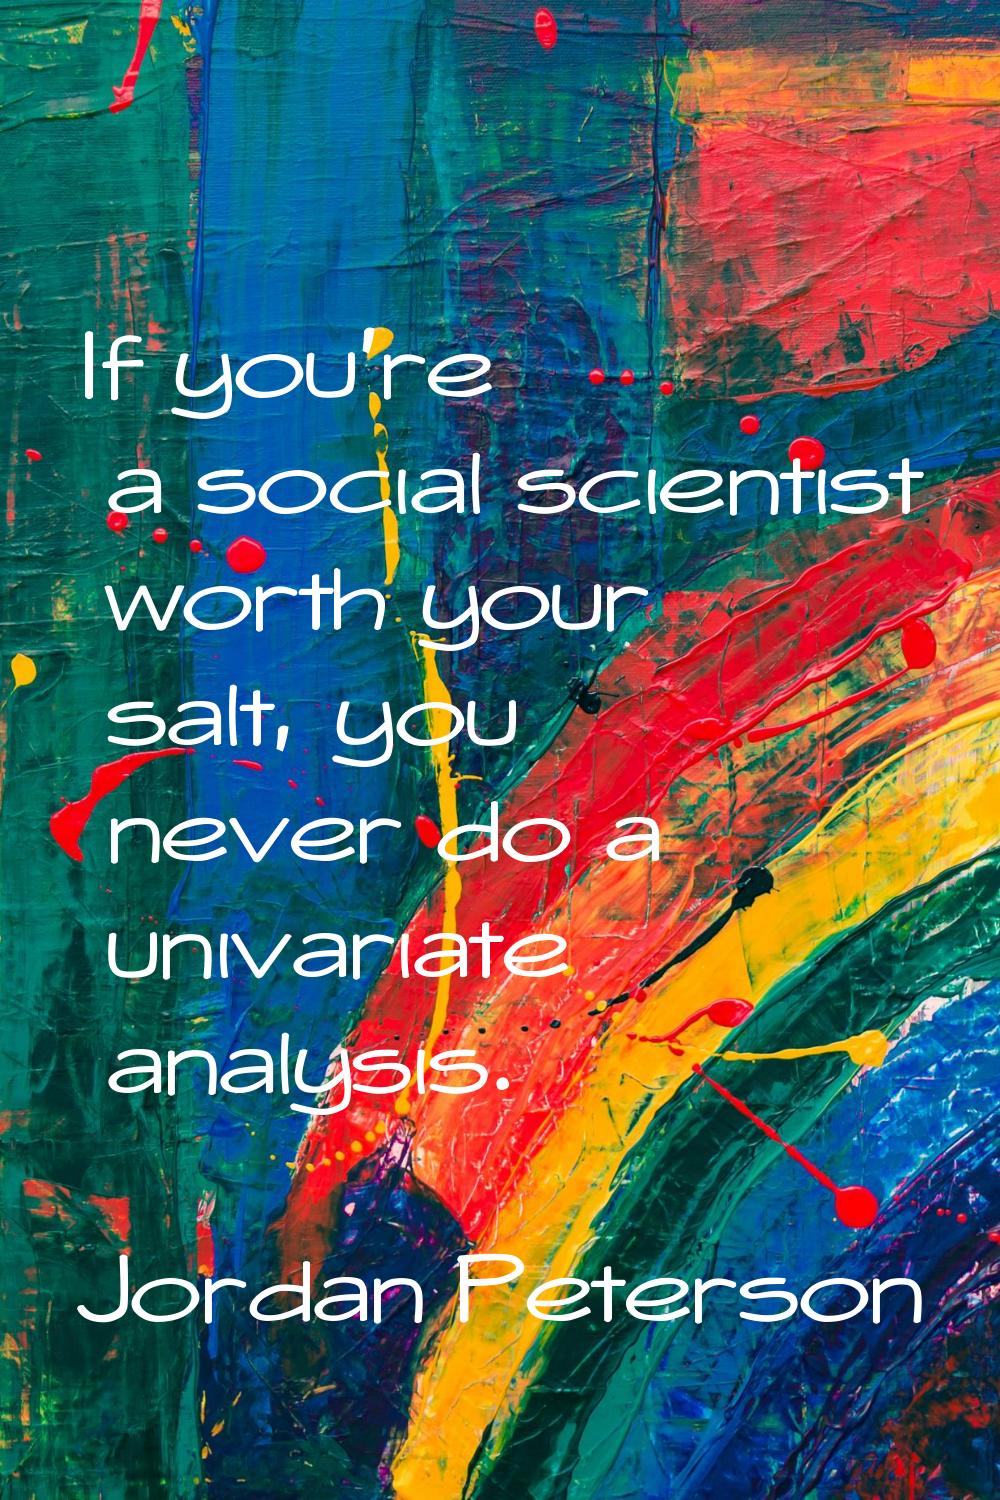 If you're a social scientist worth your salt, you never do a univariate analysis.